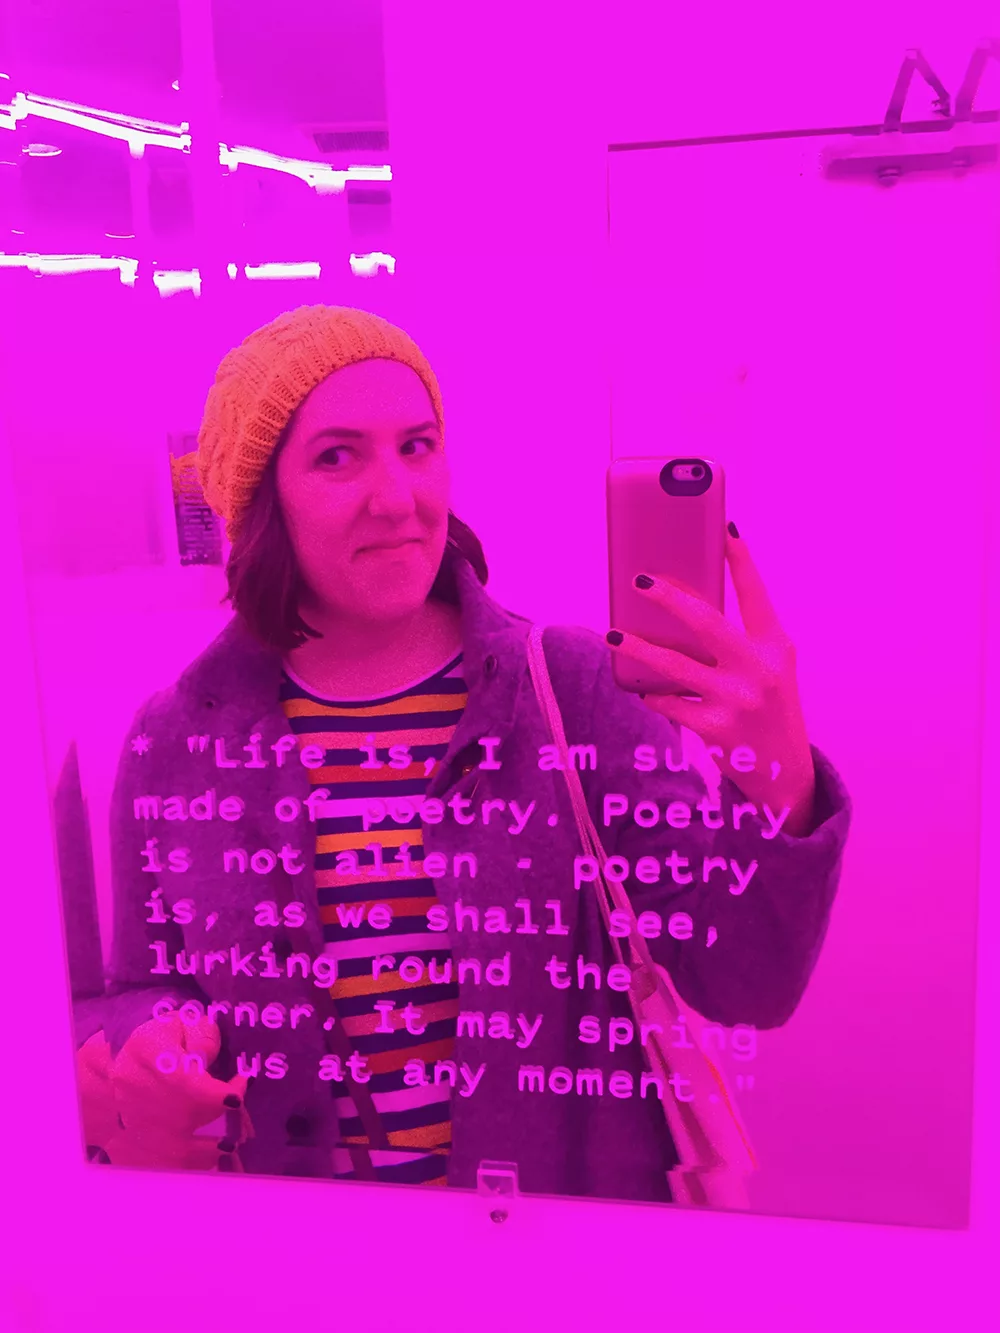 Women taking a photo in a mirror in a pink neon bathroom with quotes by Jorge Louis Borges on the mirrors